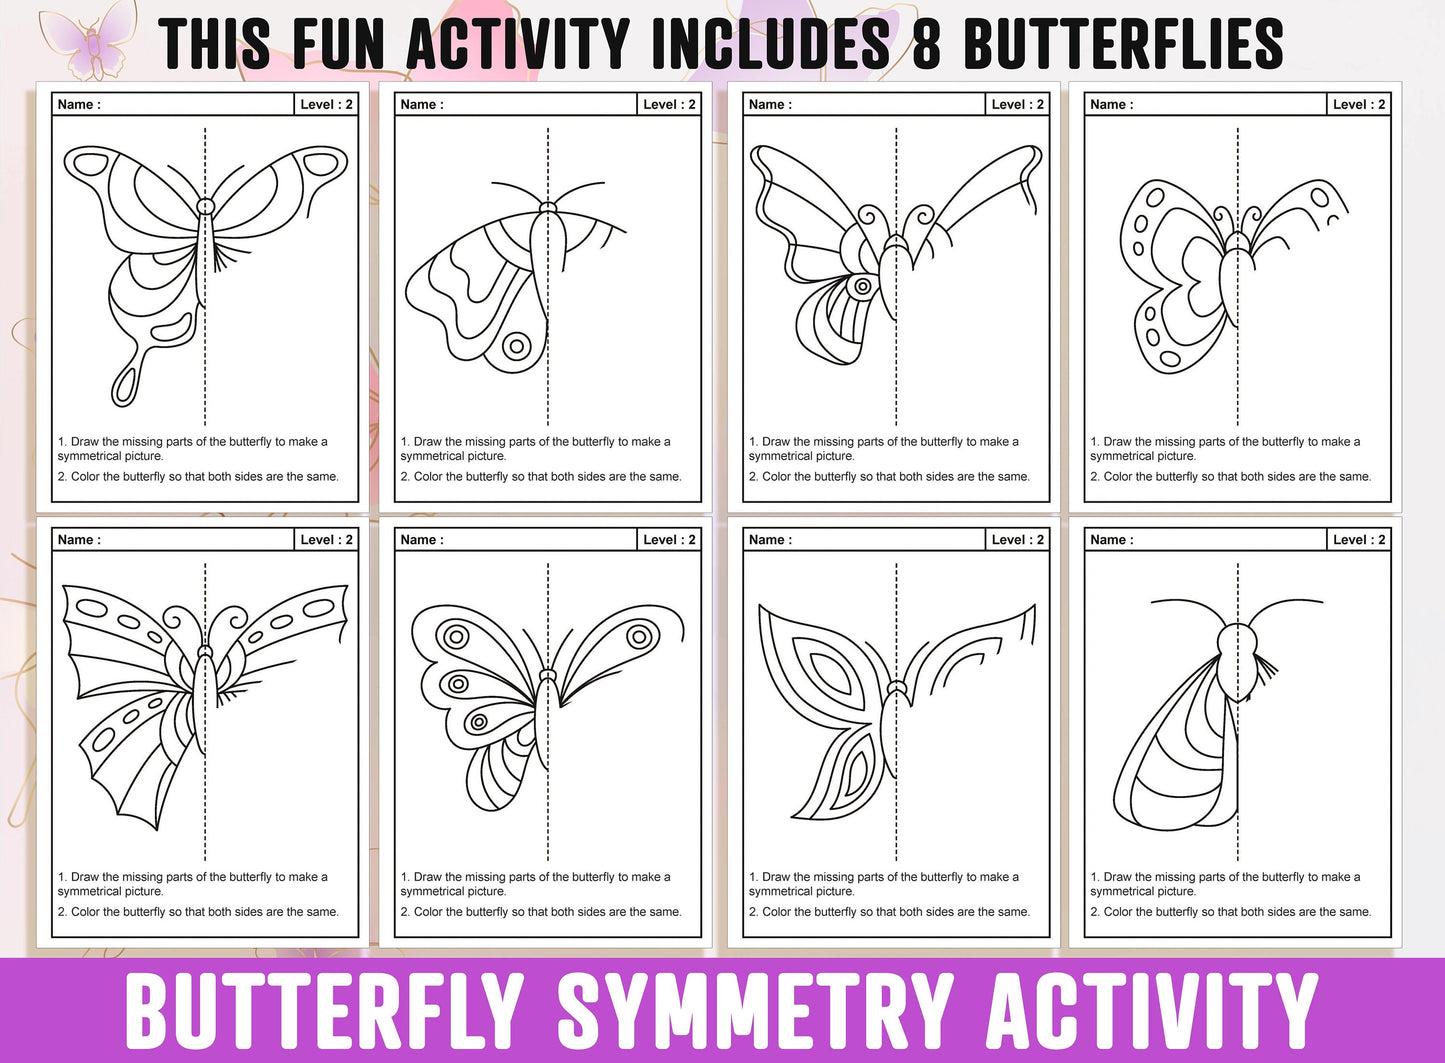 Butterfly Symmetry Worksheet, Butterfly Theme Lines of Symmetry Activity, 24 Pages, Includes 8 Butterflies, Each With 3 Levels of Difficulty